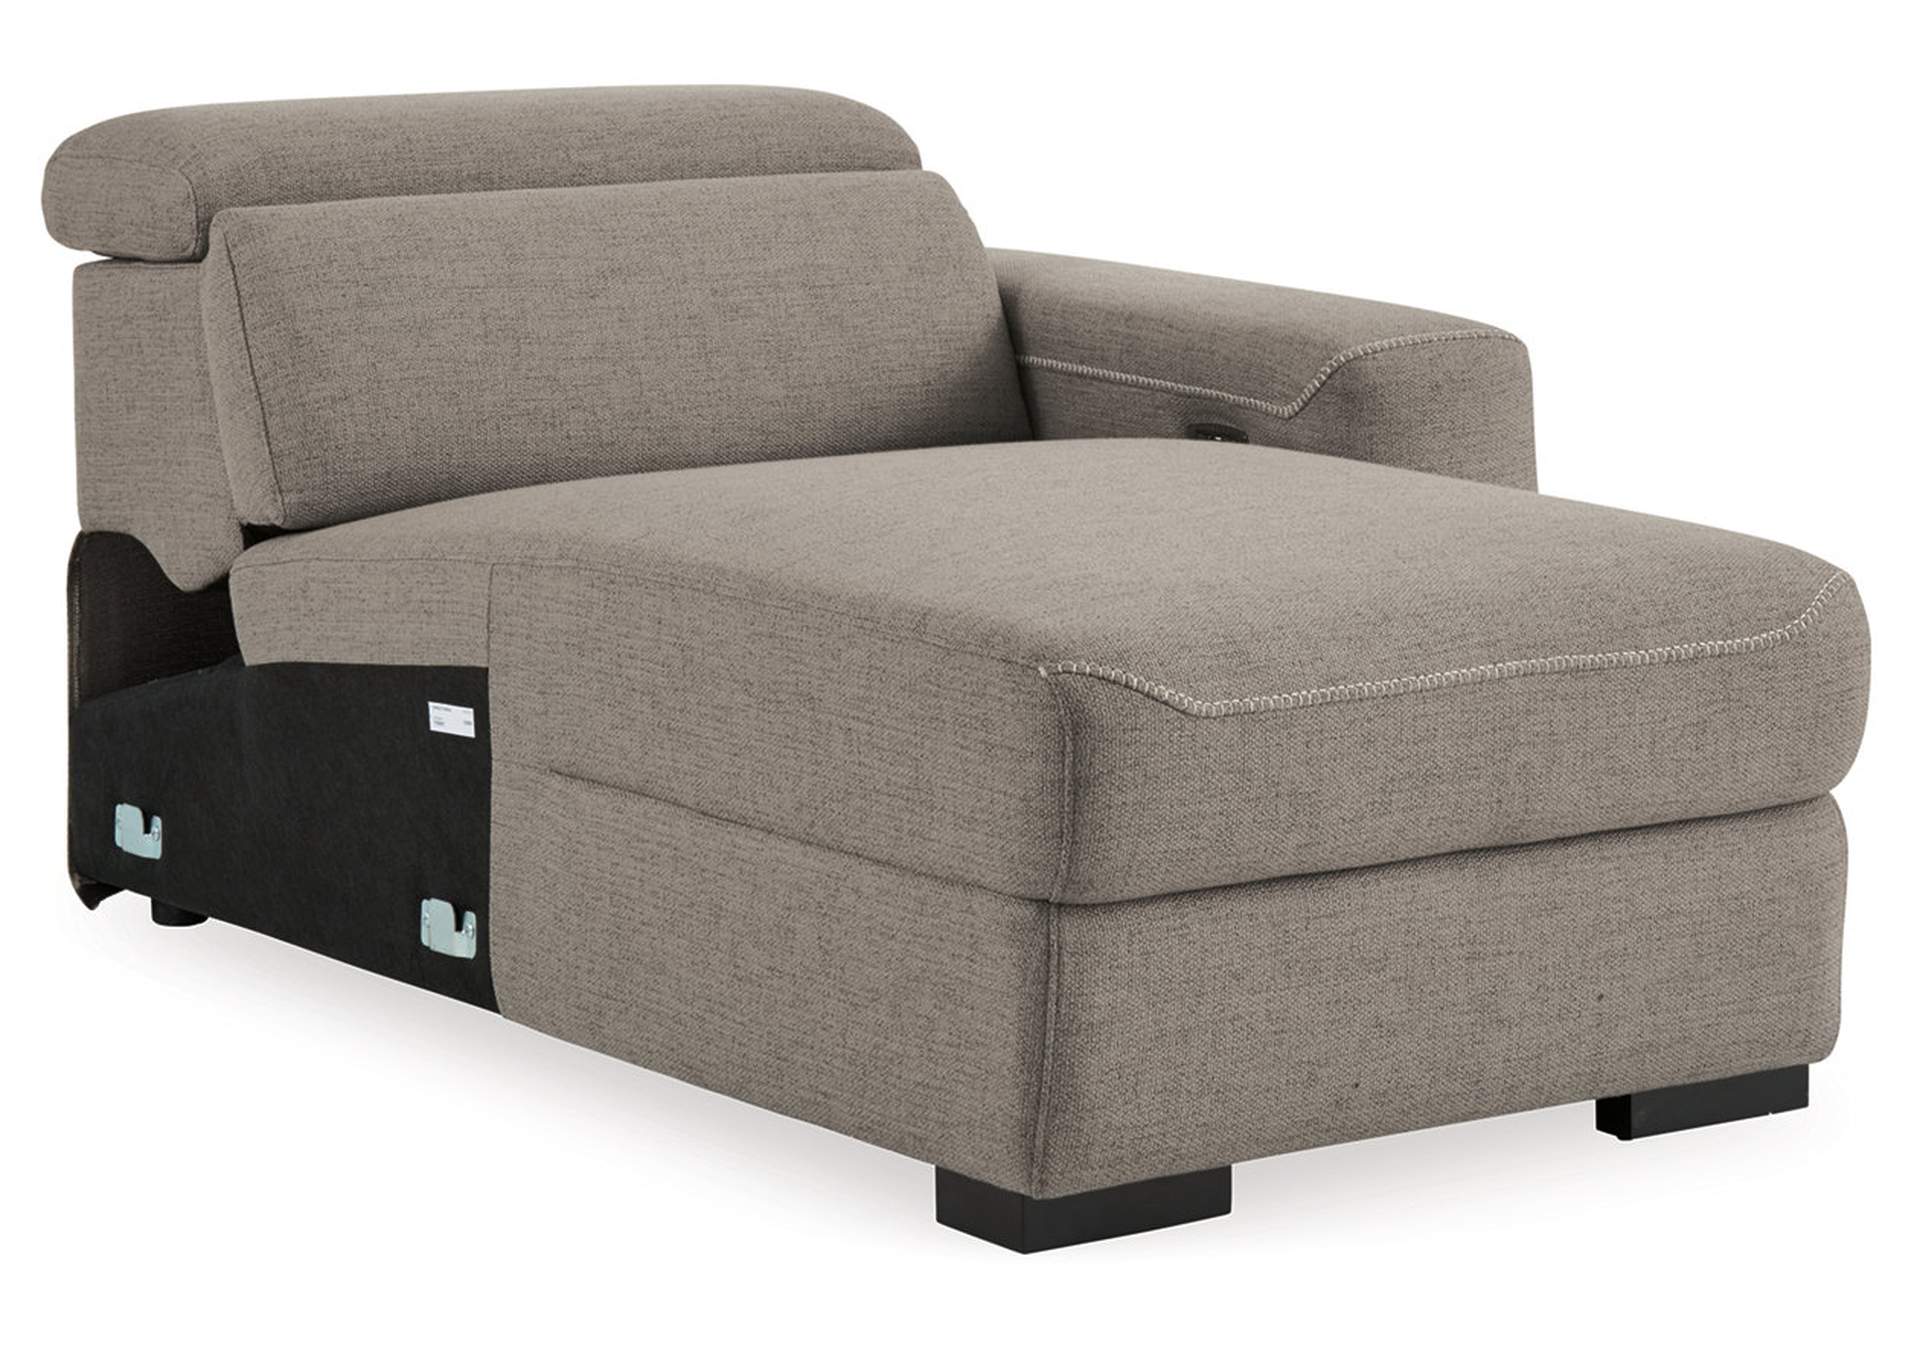 Mabton Right-Arm Facing Power Reclining Back Chaise,Signature Design By Ashley